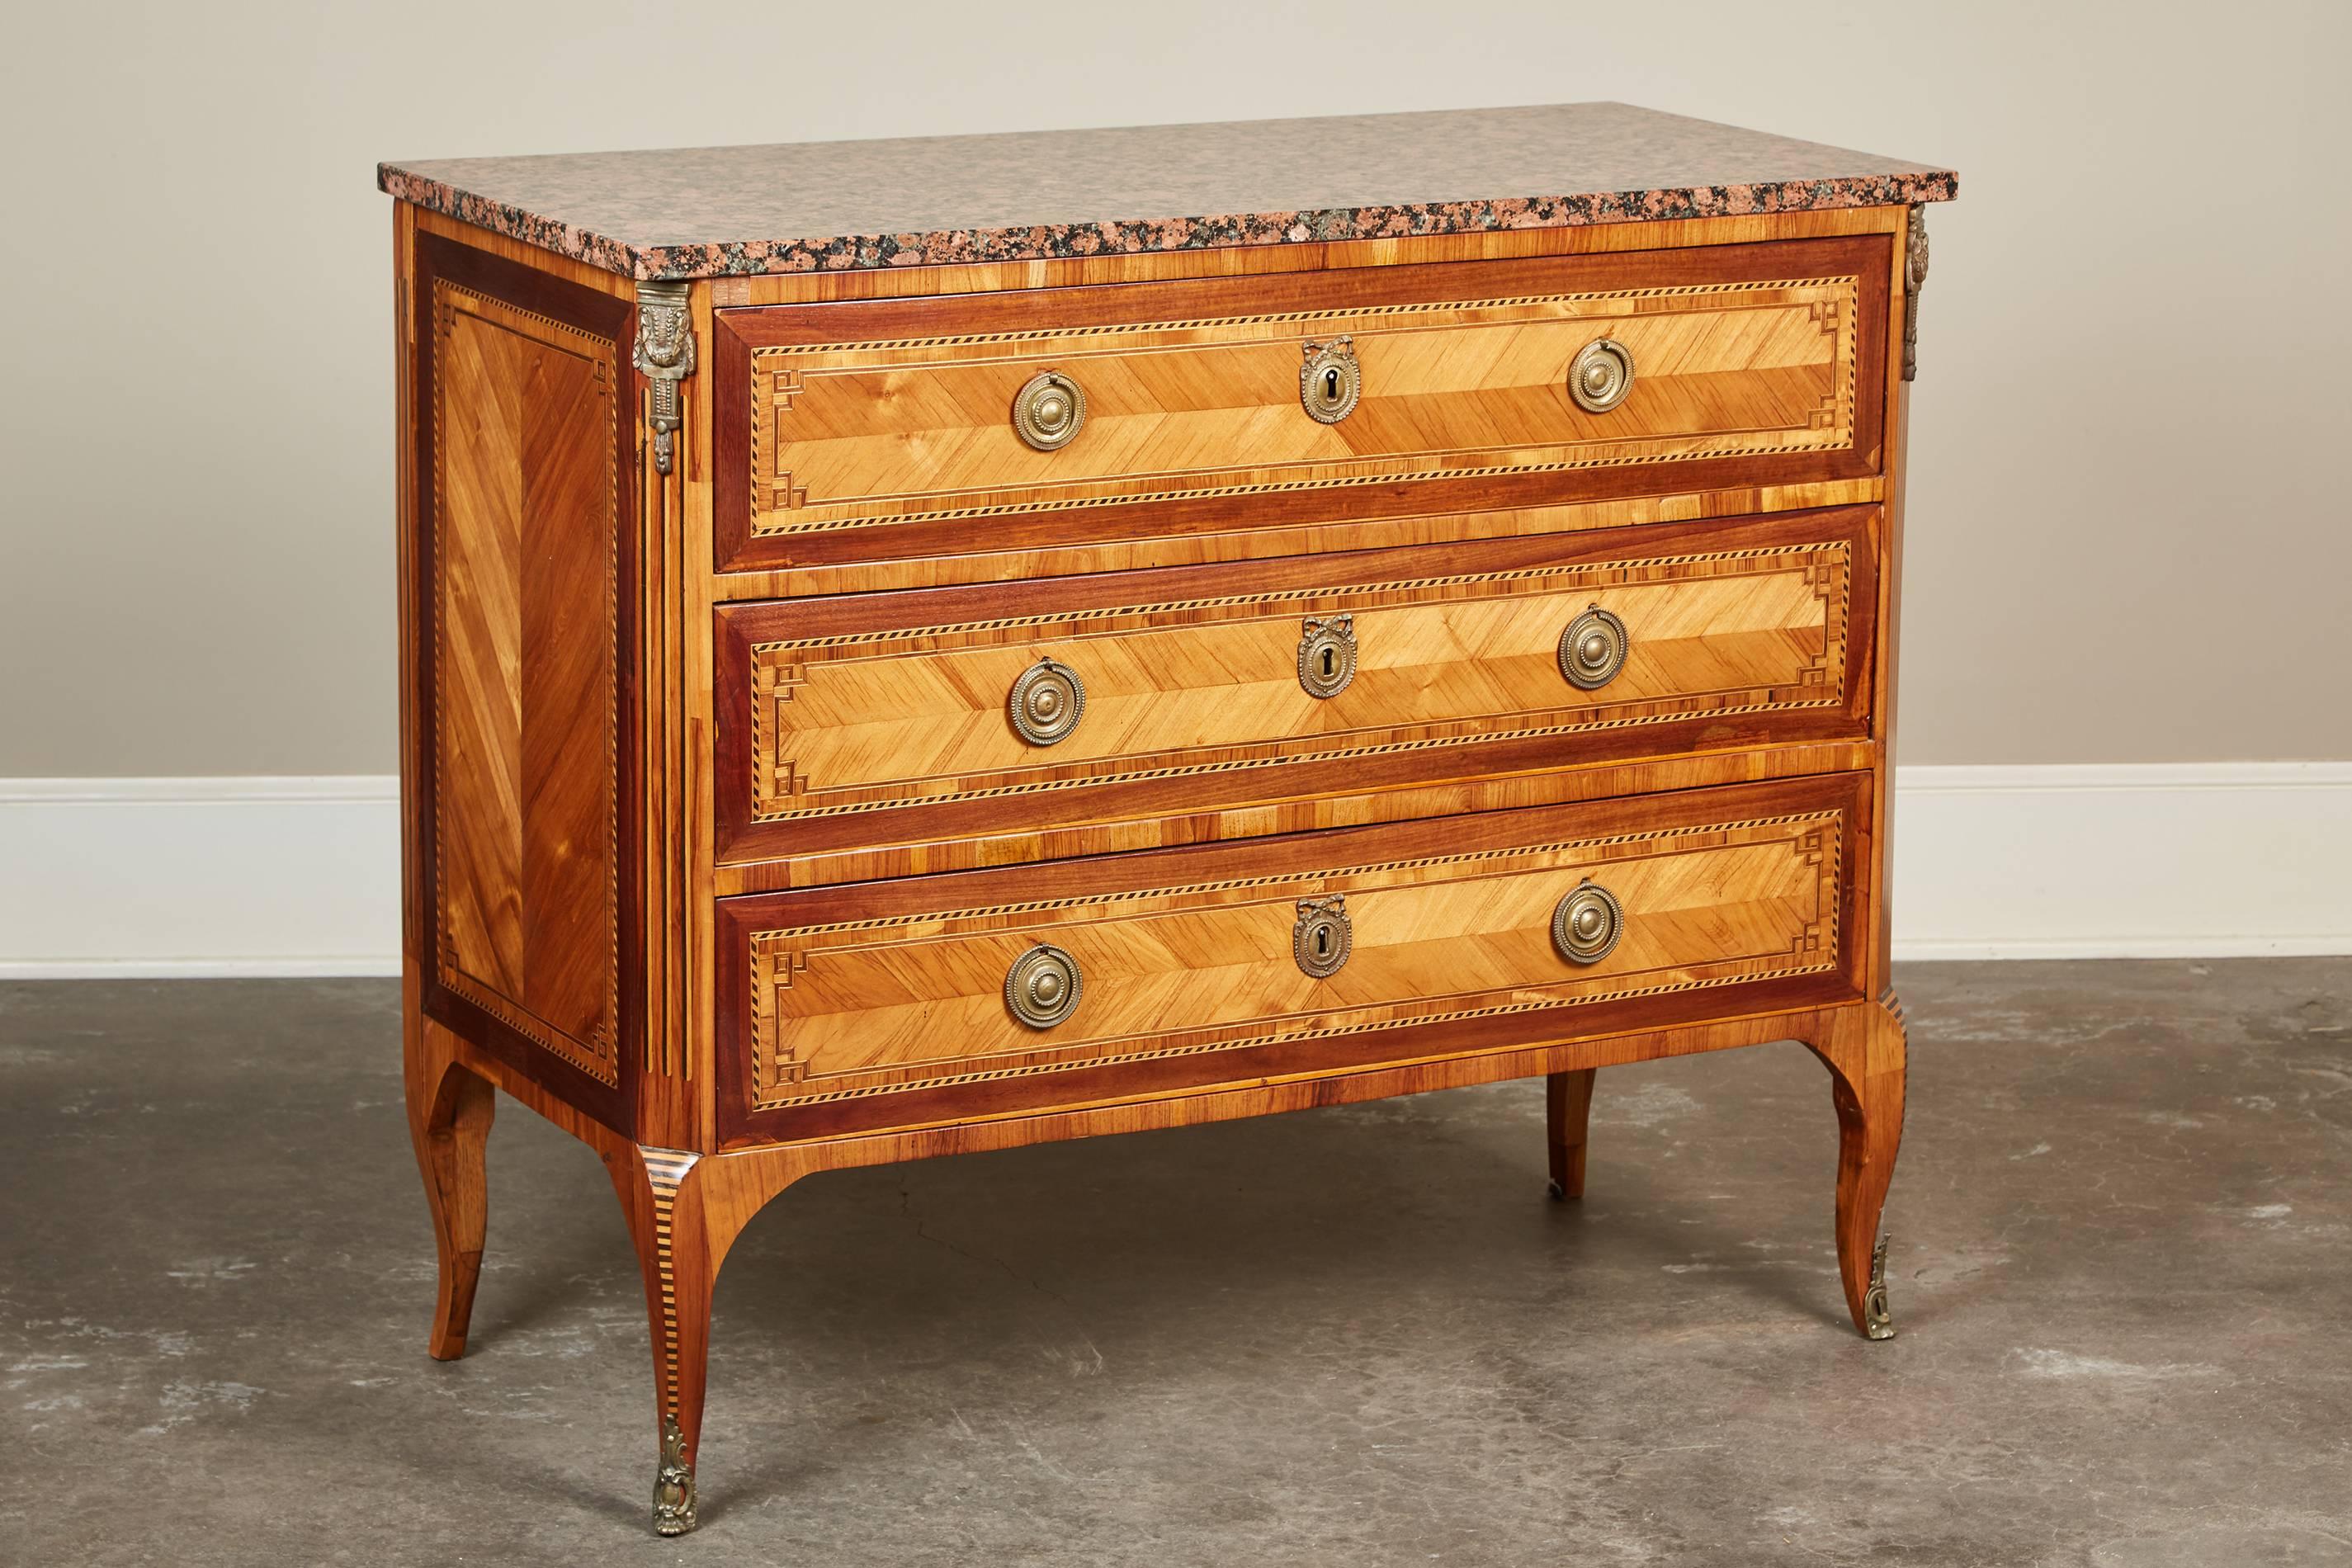 A 20th century French chest of drawers with geometric marquetry inlay and a marble top.